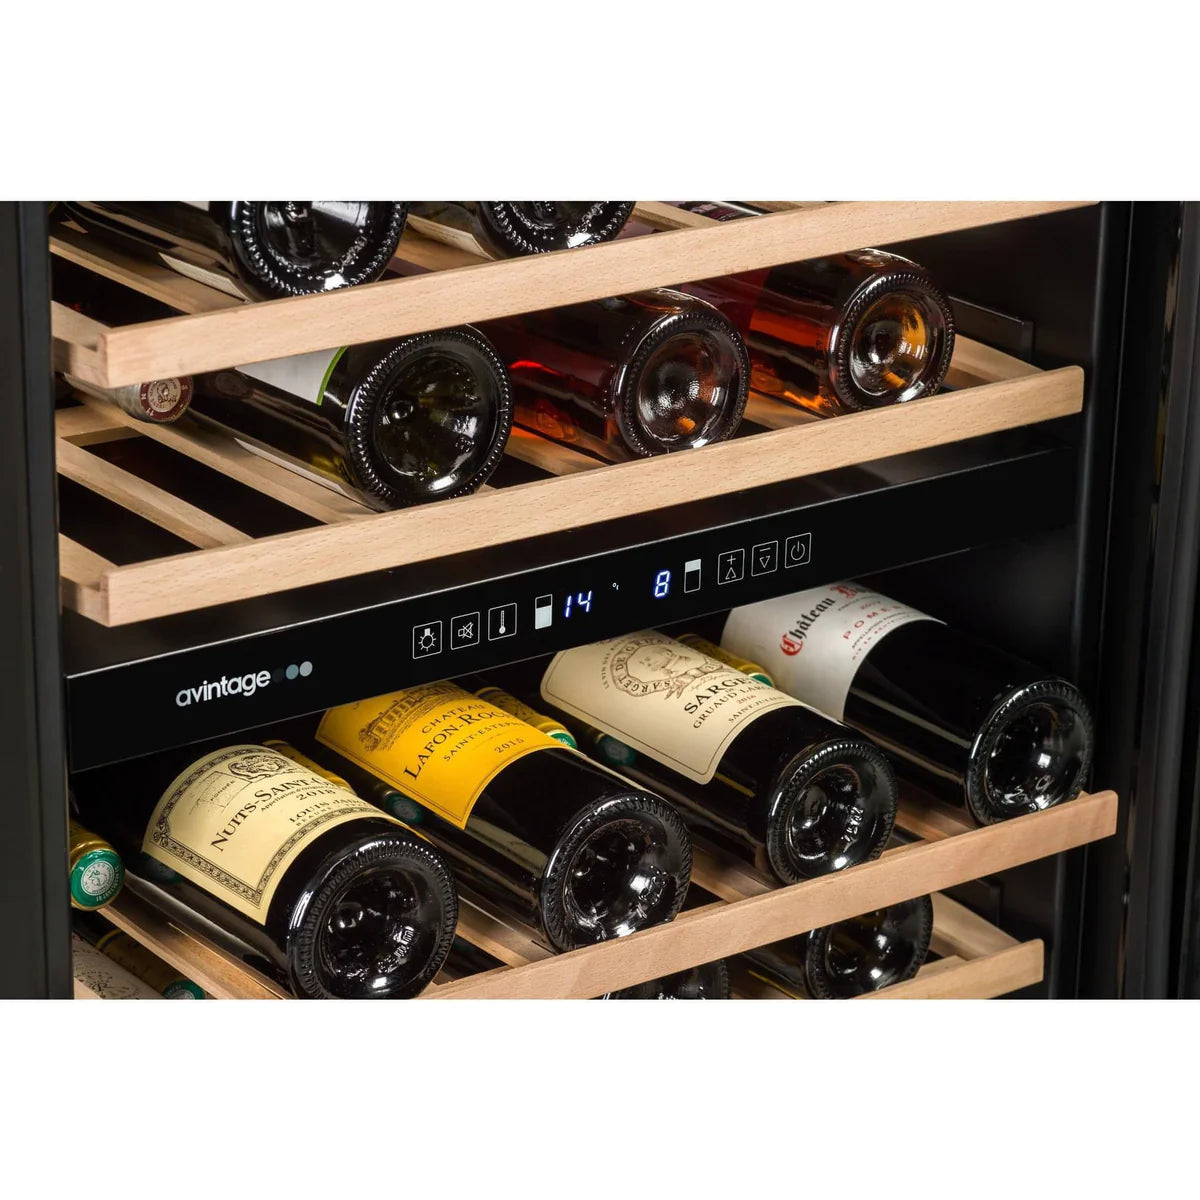 Wine chiller too short - solutions??